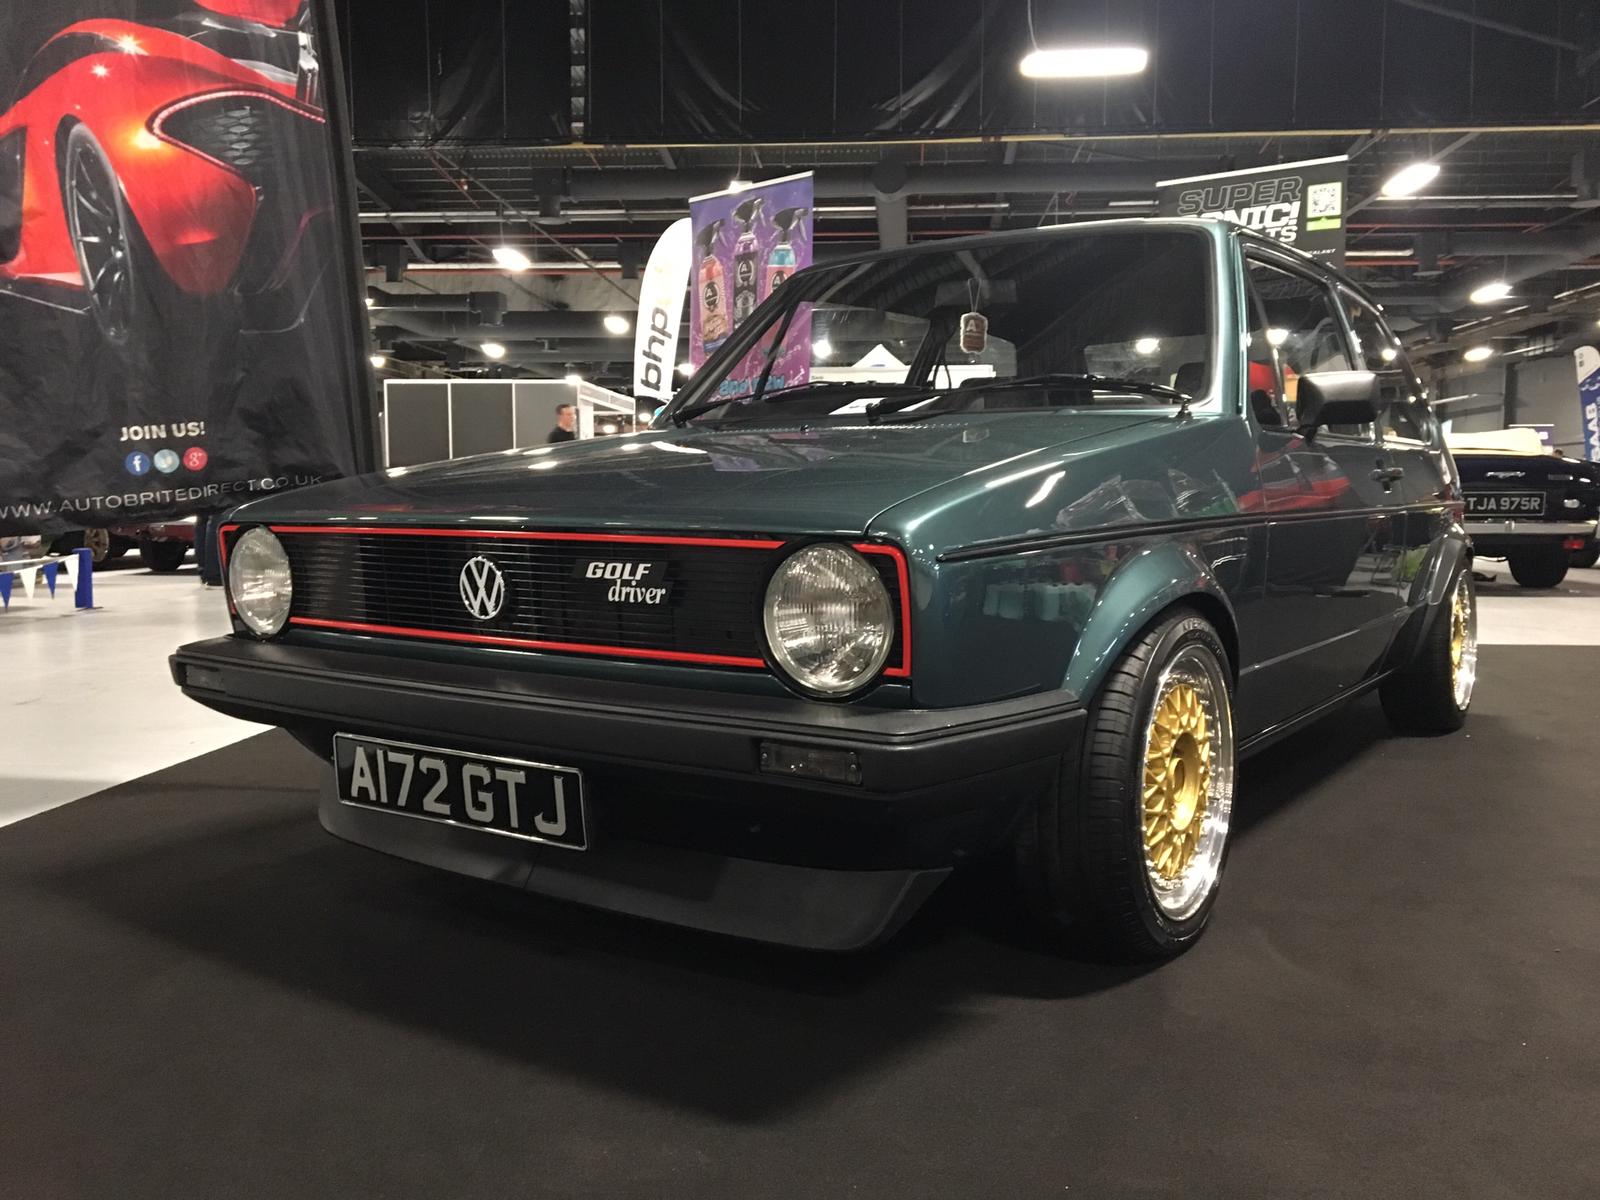 Gold wheels add some bling to this VW Golf